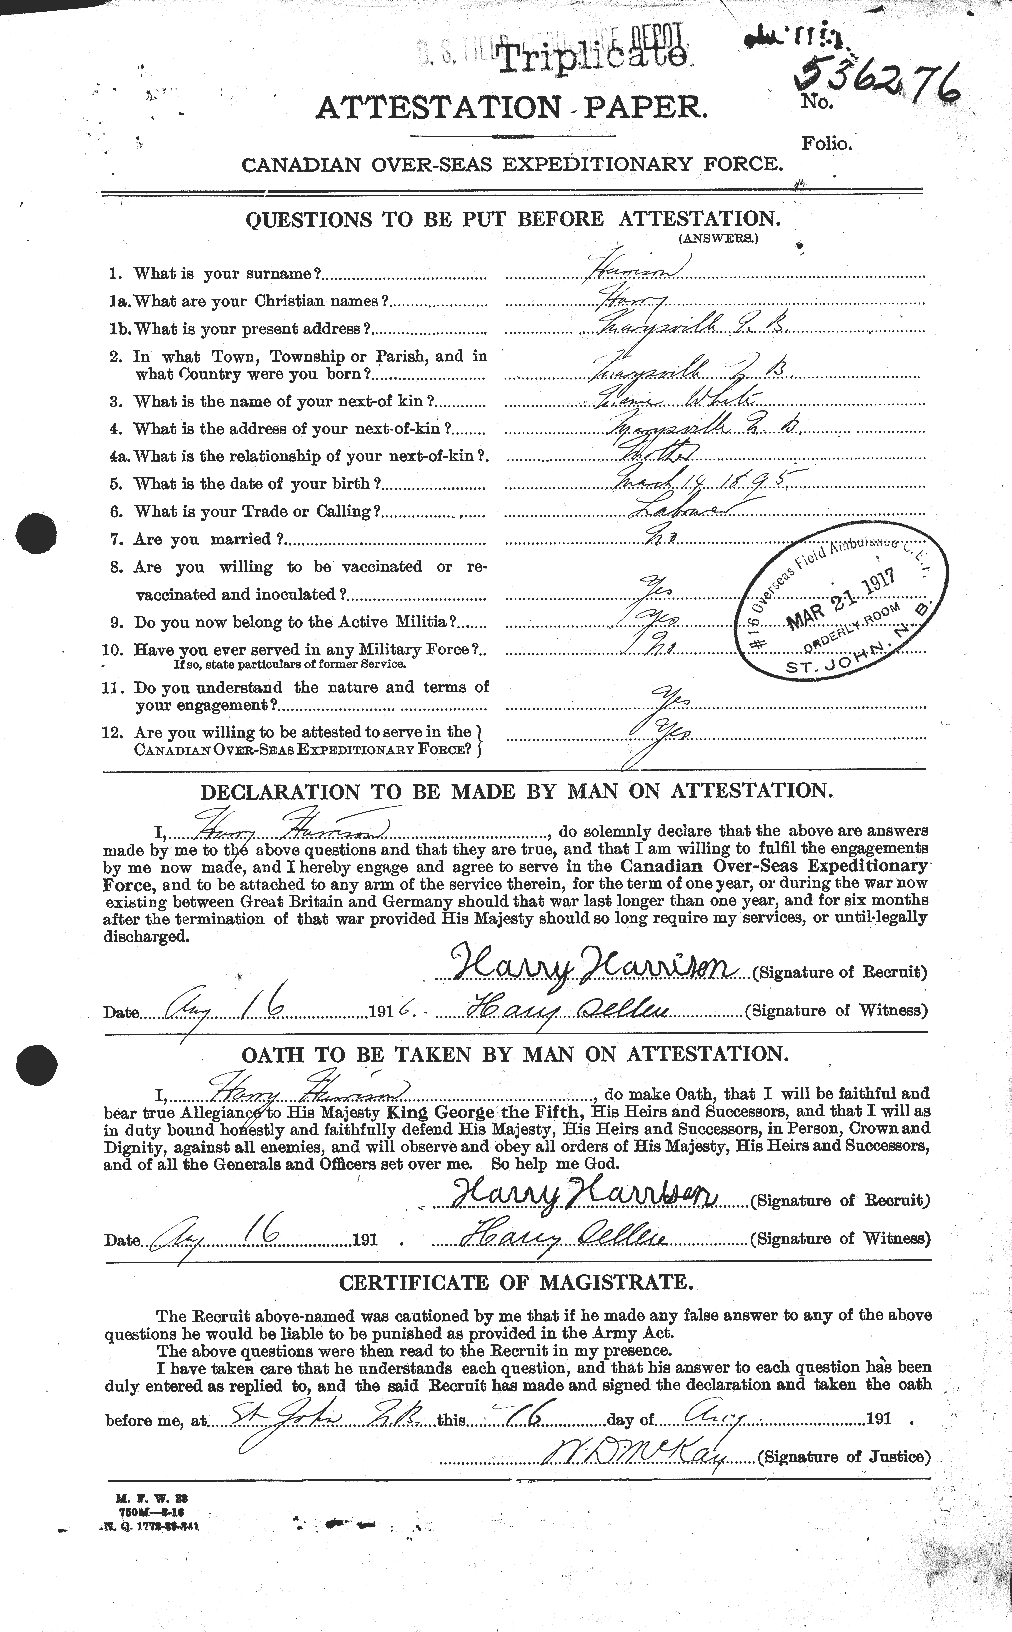 Personnel Records of the First World War - CEF 380496a